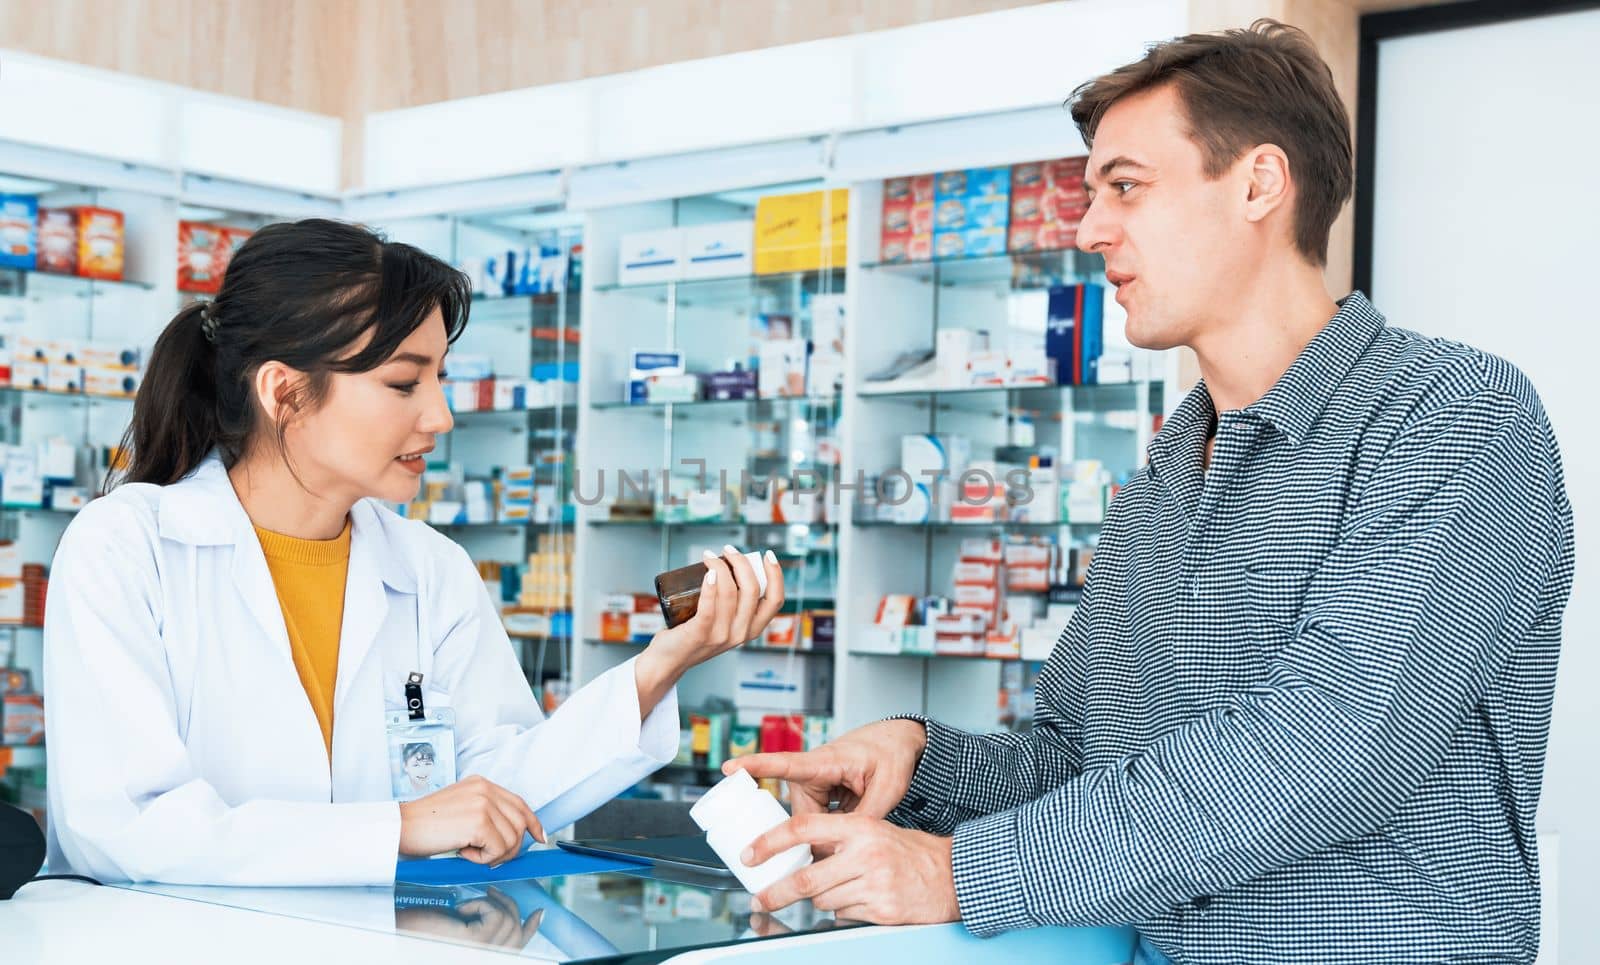 Professional pharmacist advise or explain property of qualified medical product to customer in pharmacy, druggist answer to client healthcare inquiry, medical service and consultation concept.